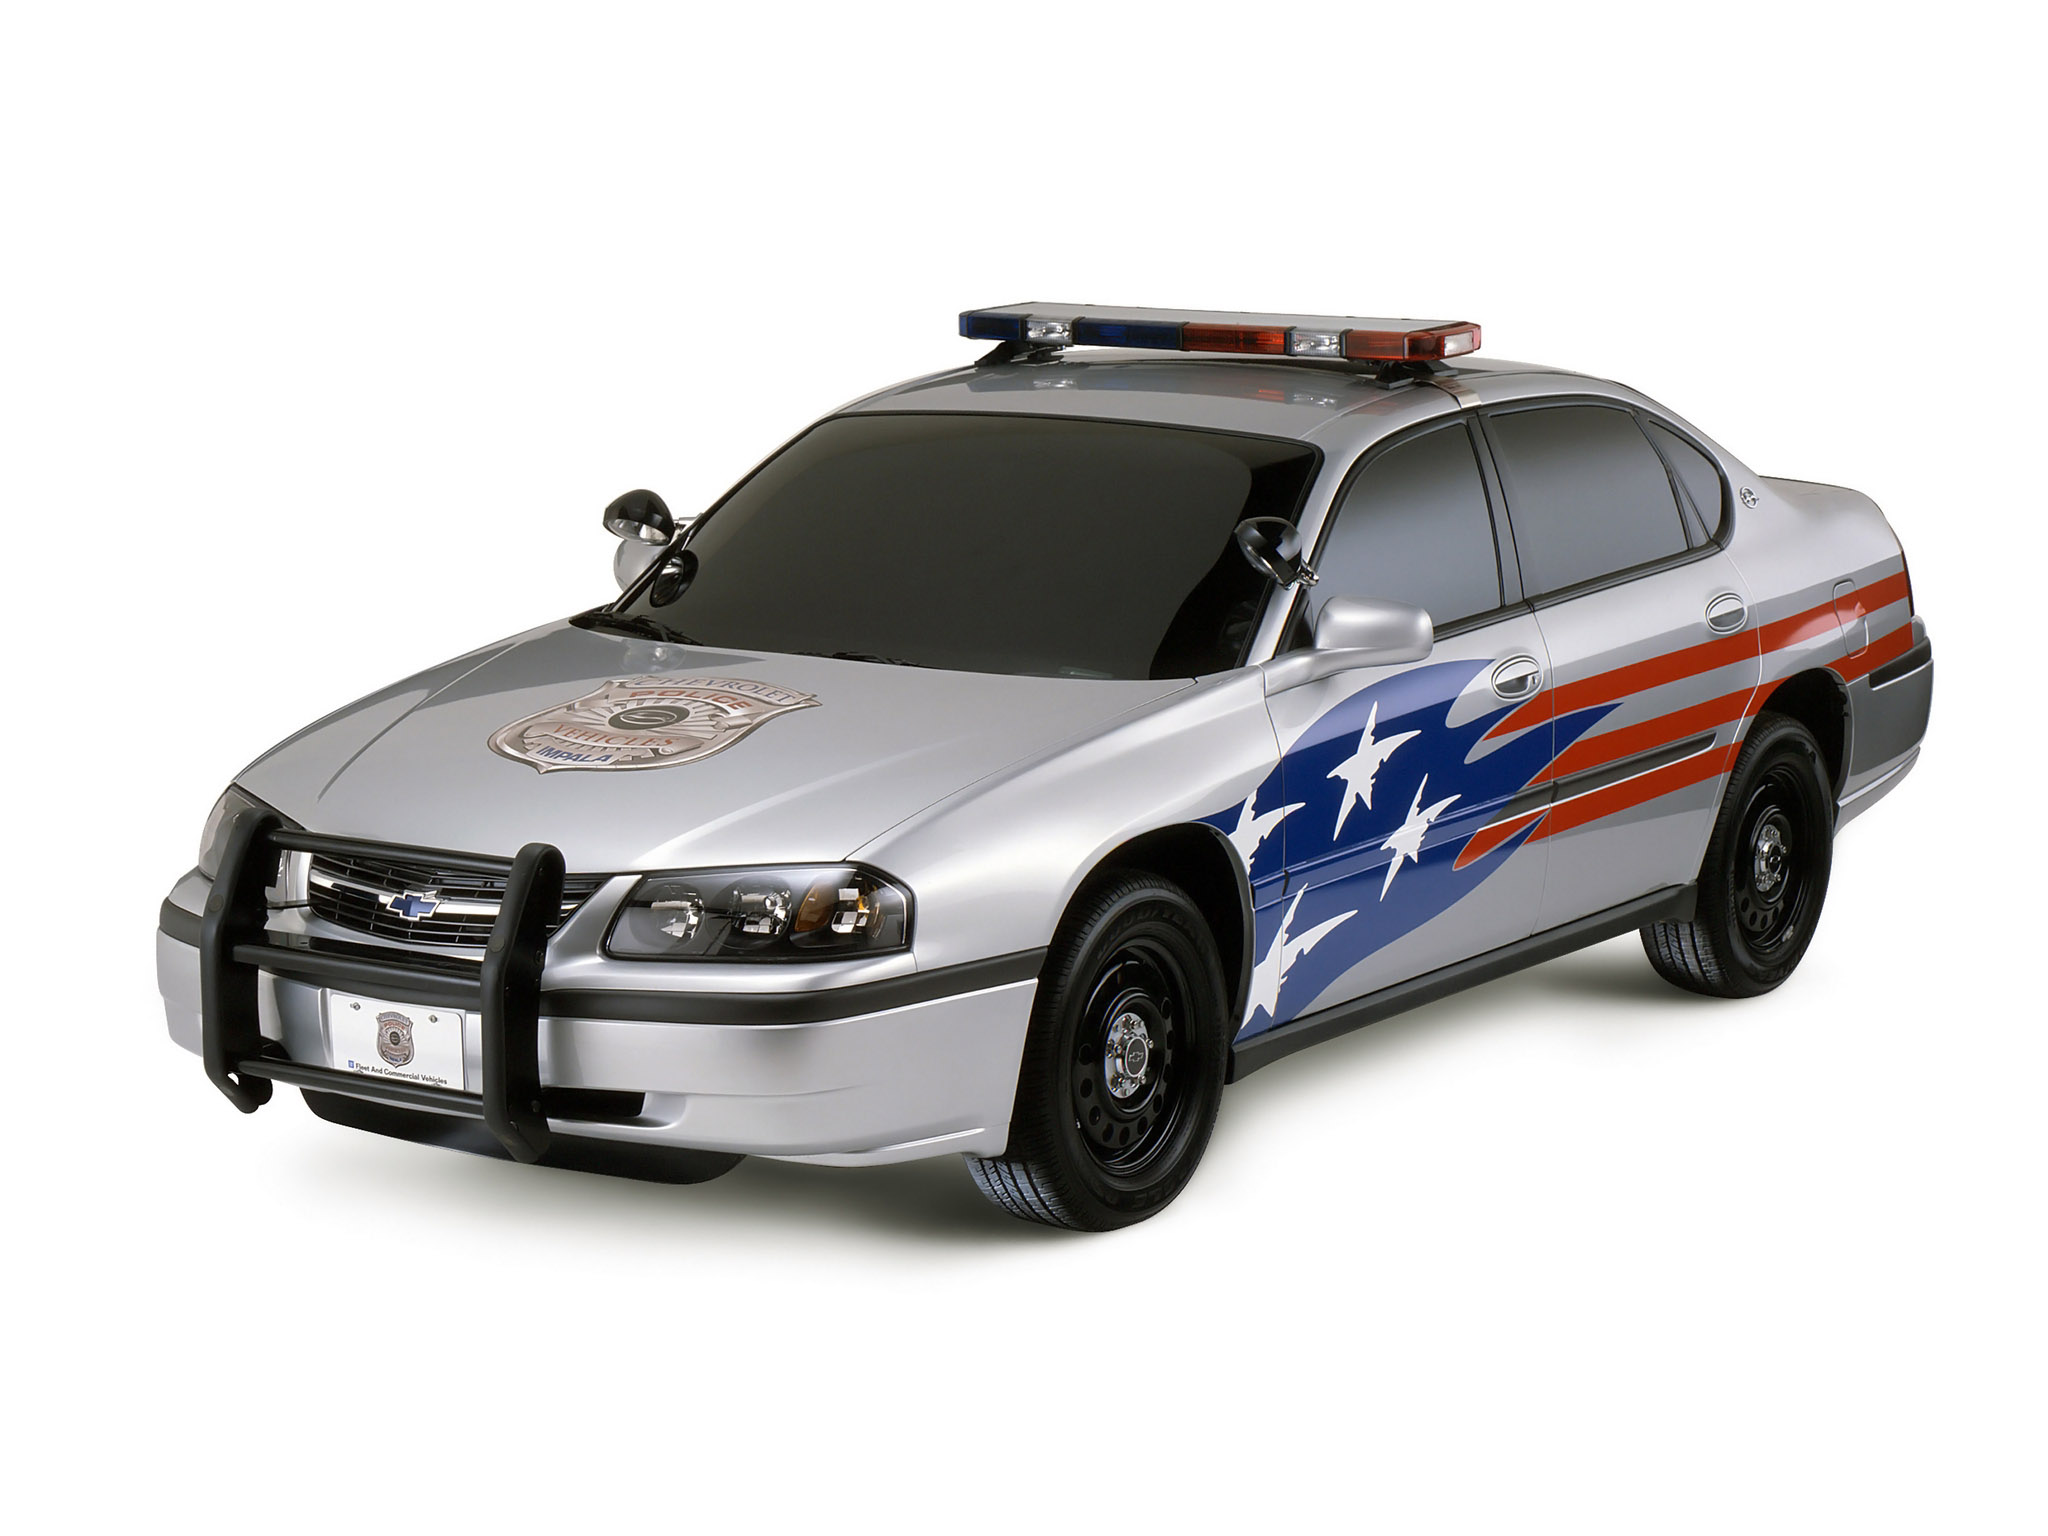 2003, Chevrolet, Impala, Police, Muscle Wallpaper